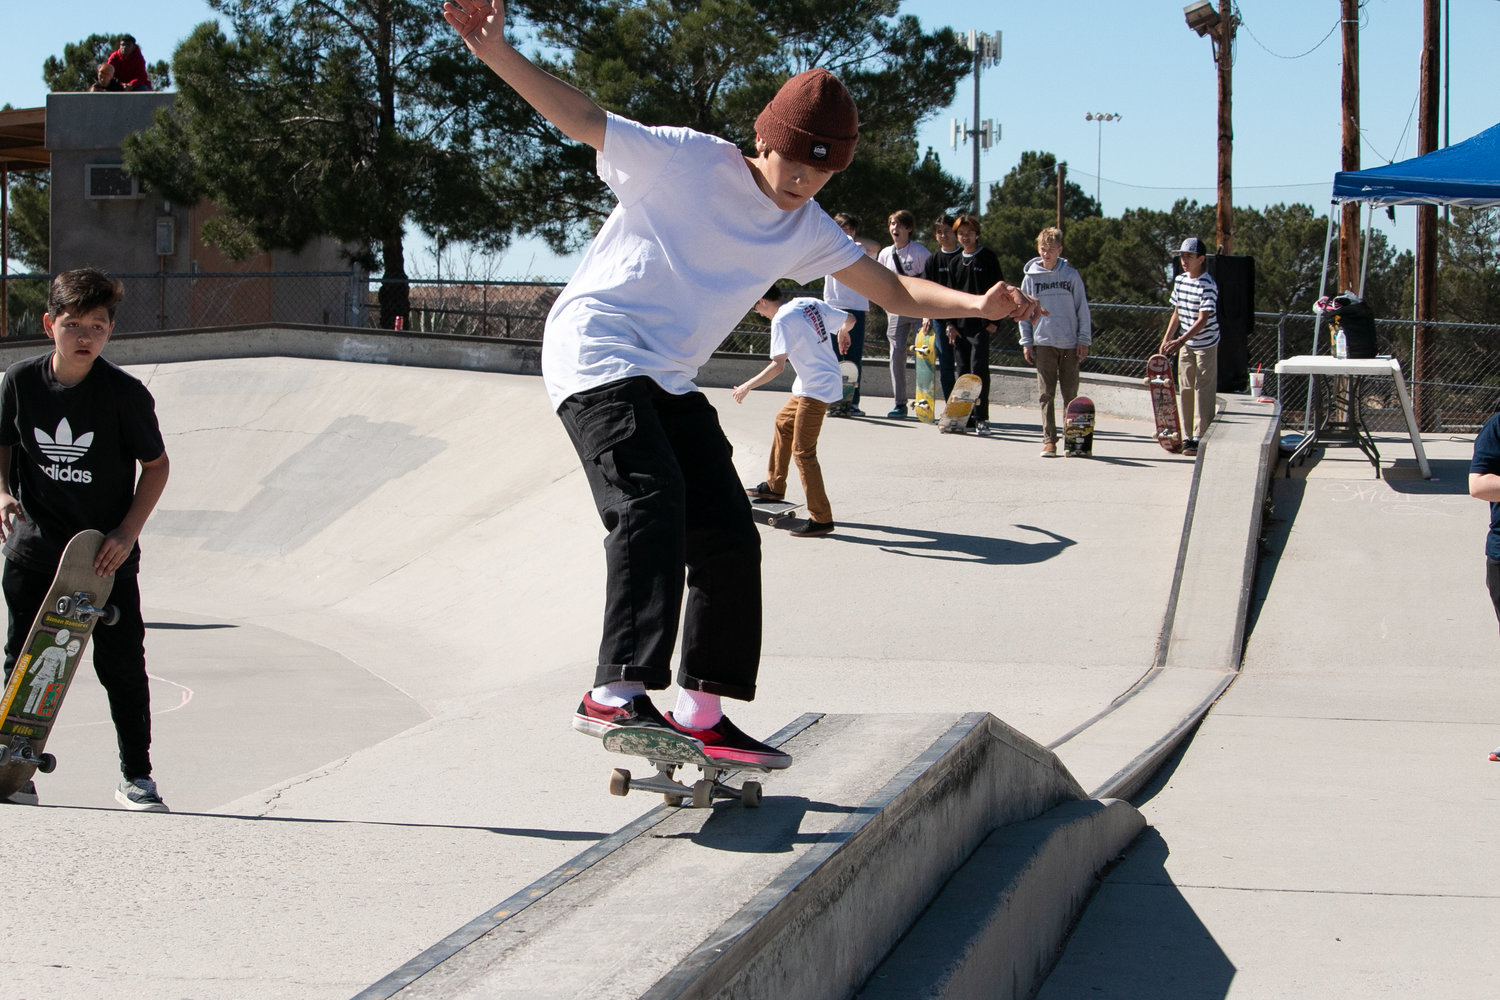 Rowan Langle of Las Cruces participates in the intermediate division skate-off at Feb. 9’s ‘Legiskative’ event, which drew a crowd of about upwards of 100 participants and spectators.